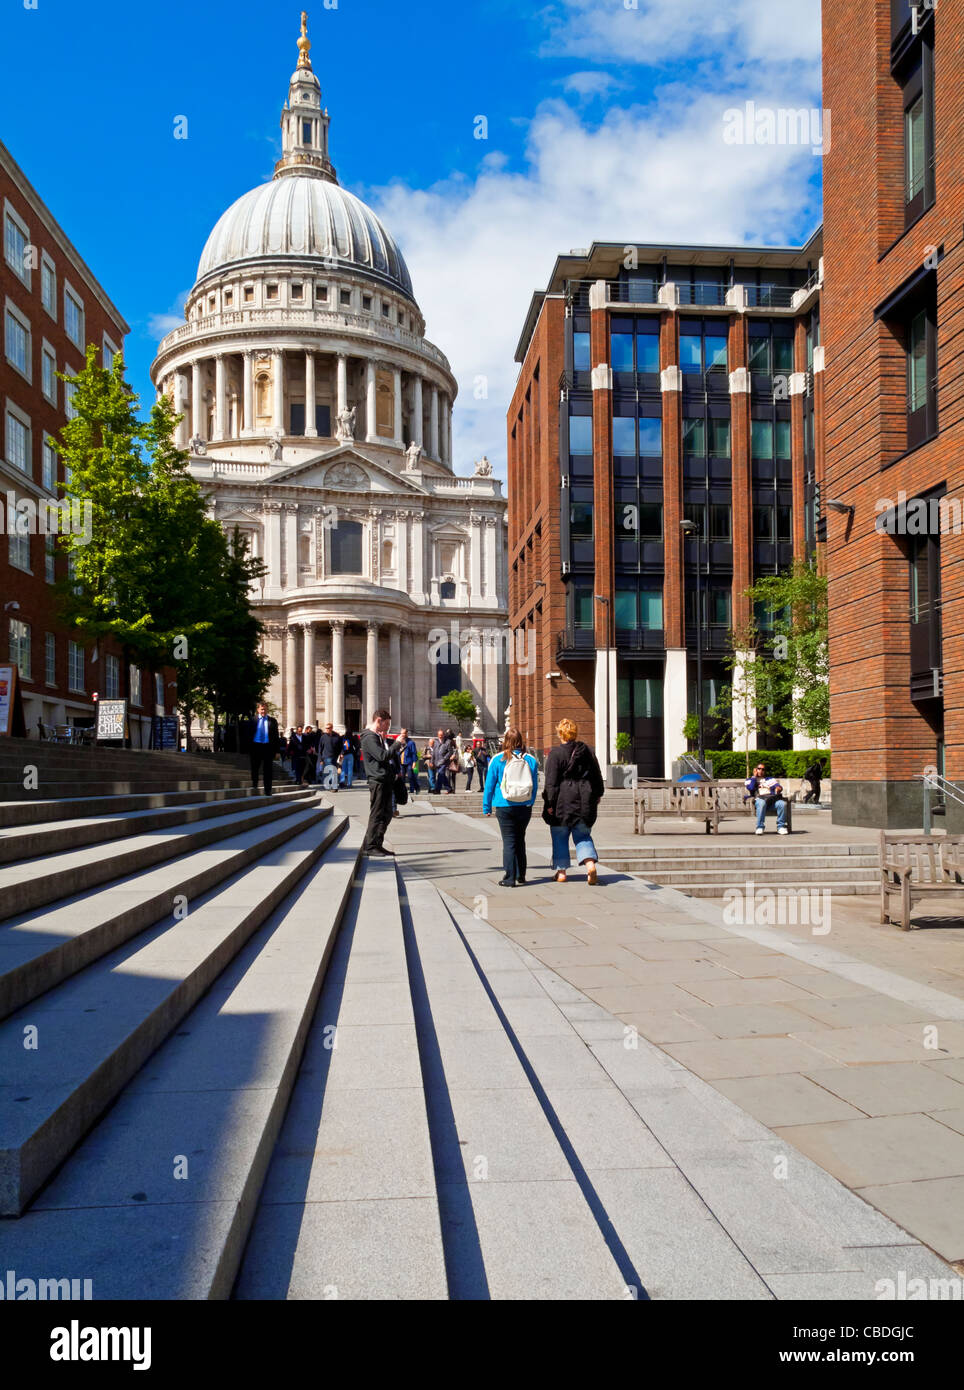 South Front of St Paul's Cathedral in the City of London England UK built by Sir Christopher Wren in the seventeenth century Stock Photo